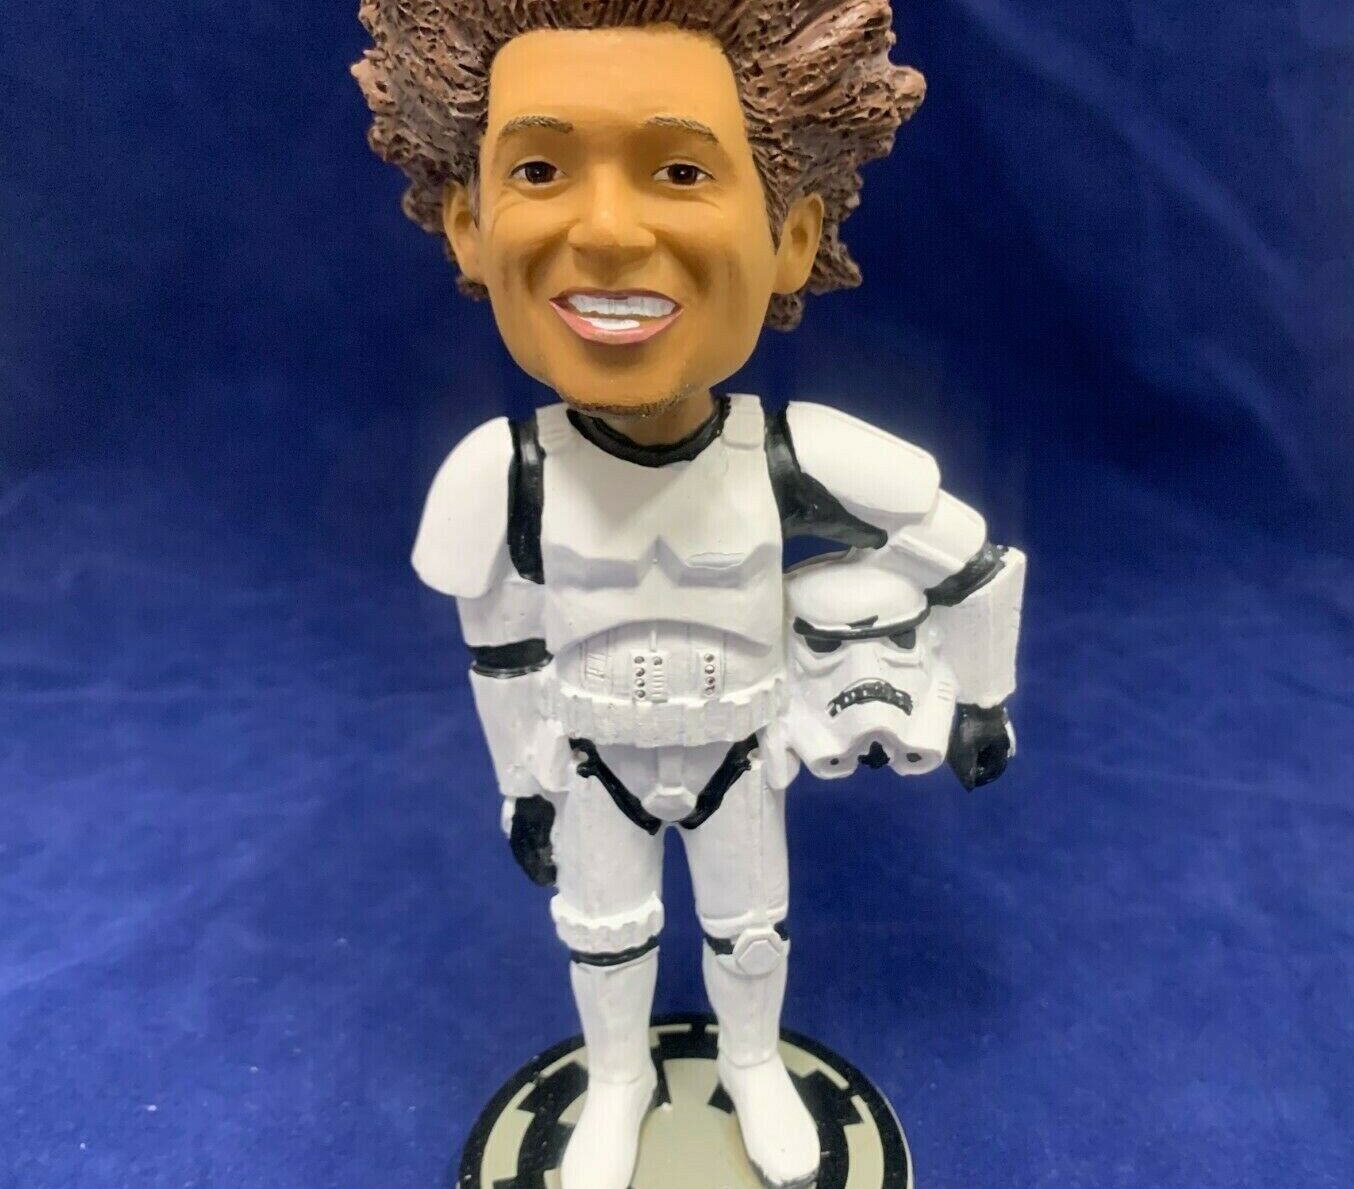 Tampa Bay Rays Chris Archer Star Wars Stormtrooper Bobblehead New in Box